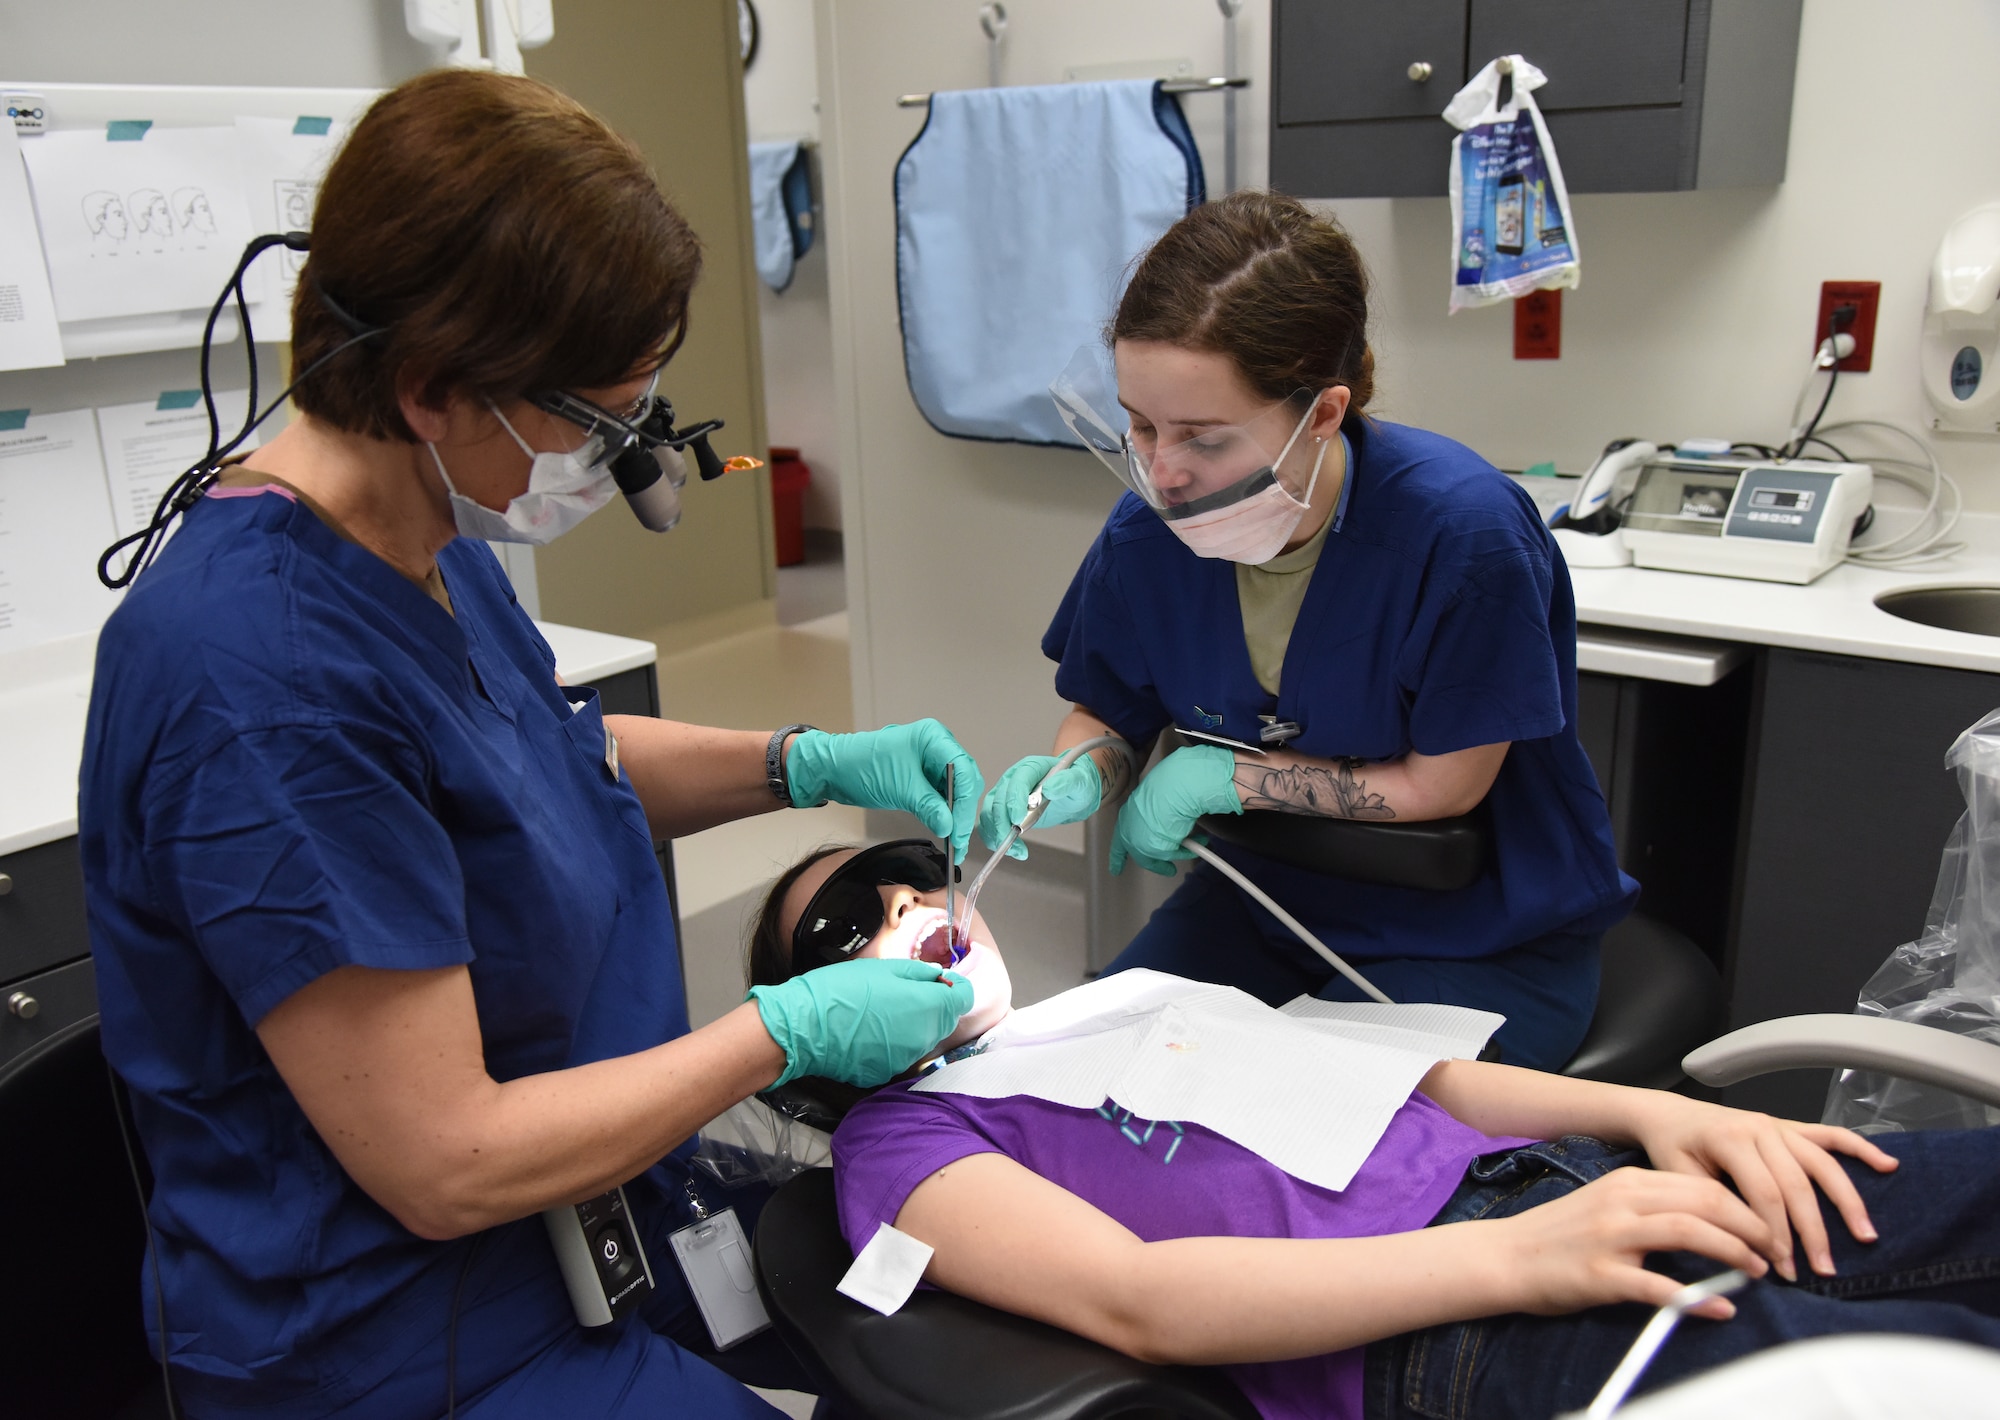 U.S. Air Force Maj. Iwona Rusiecka, 81st Dental Squadron resident, and Airman 1st Class Audrey Mitstifer, 81st DS dental assistant, clean the teeth of Andrea Linstrom, daughter of Master Sgt. Kenneth Linstrom, 336th Training Squadron flight chief, during the 9th Annual Give Kids a Smile Day at the dental clinic inside the Keesler Medical Center at Keesler Air Force Base, Mississippi, Feb. 15, 2019. The event was held in recognition of National Children's Dental Health Month and included free dental exams, radiographs and cleanings for children age two and older. (U.S. Air Force photo by Kemberly Groue)